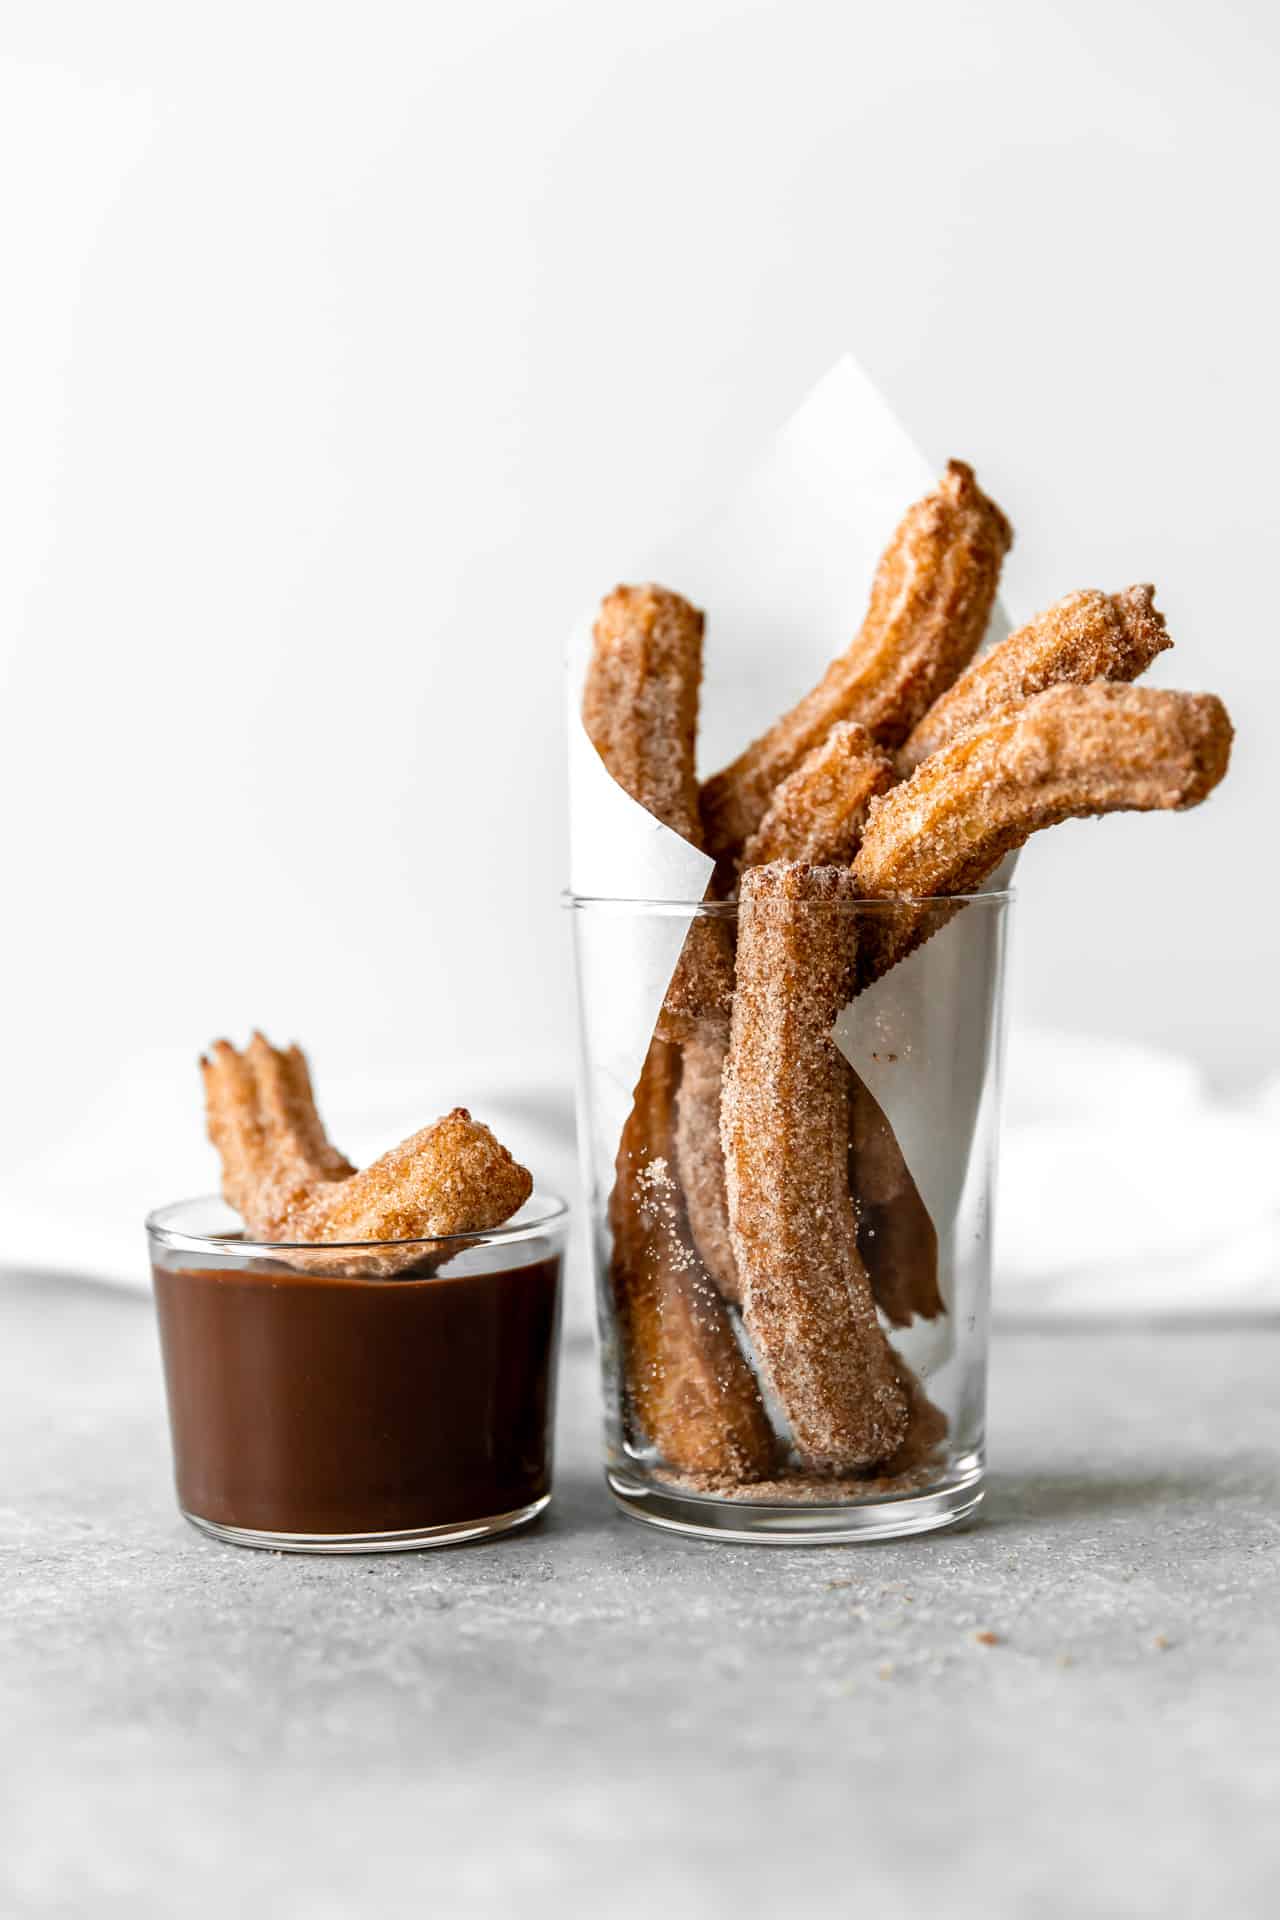 Fried Churros in a cup with a small cup of chocolate fudge sauce.